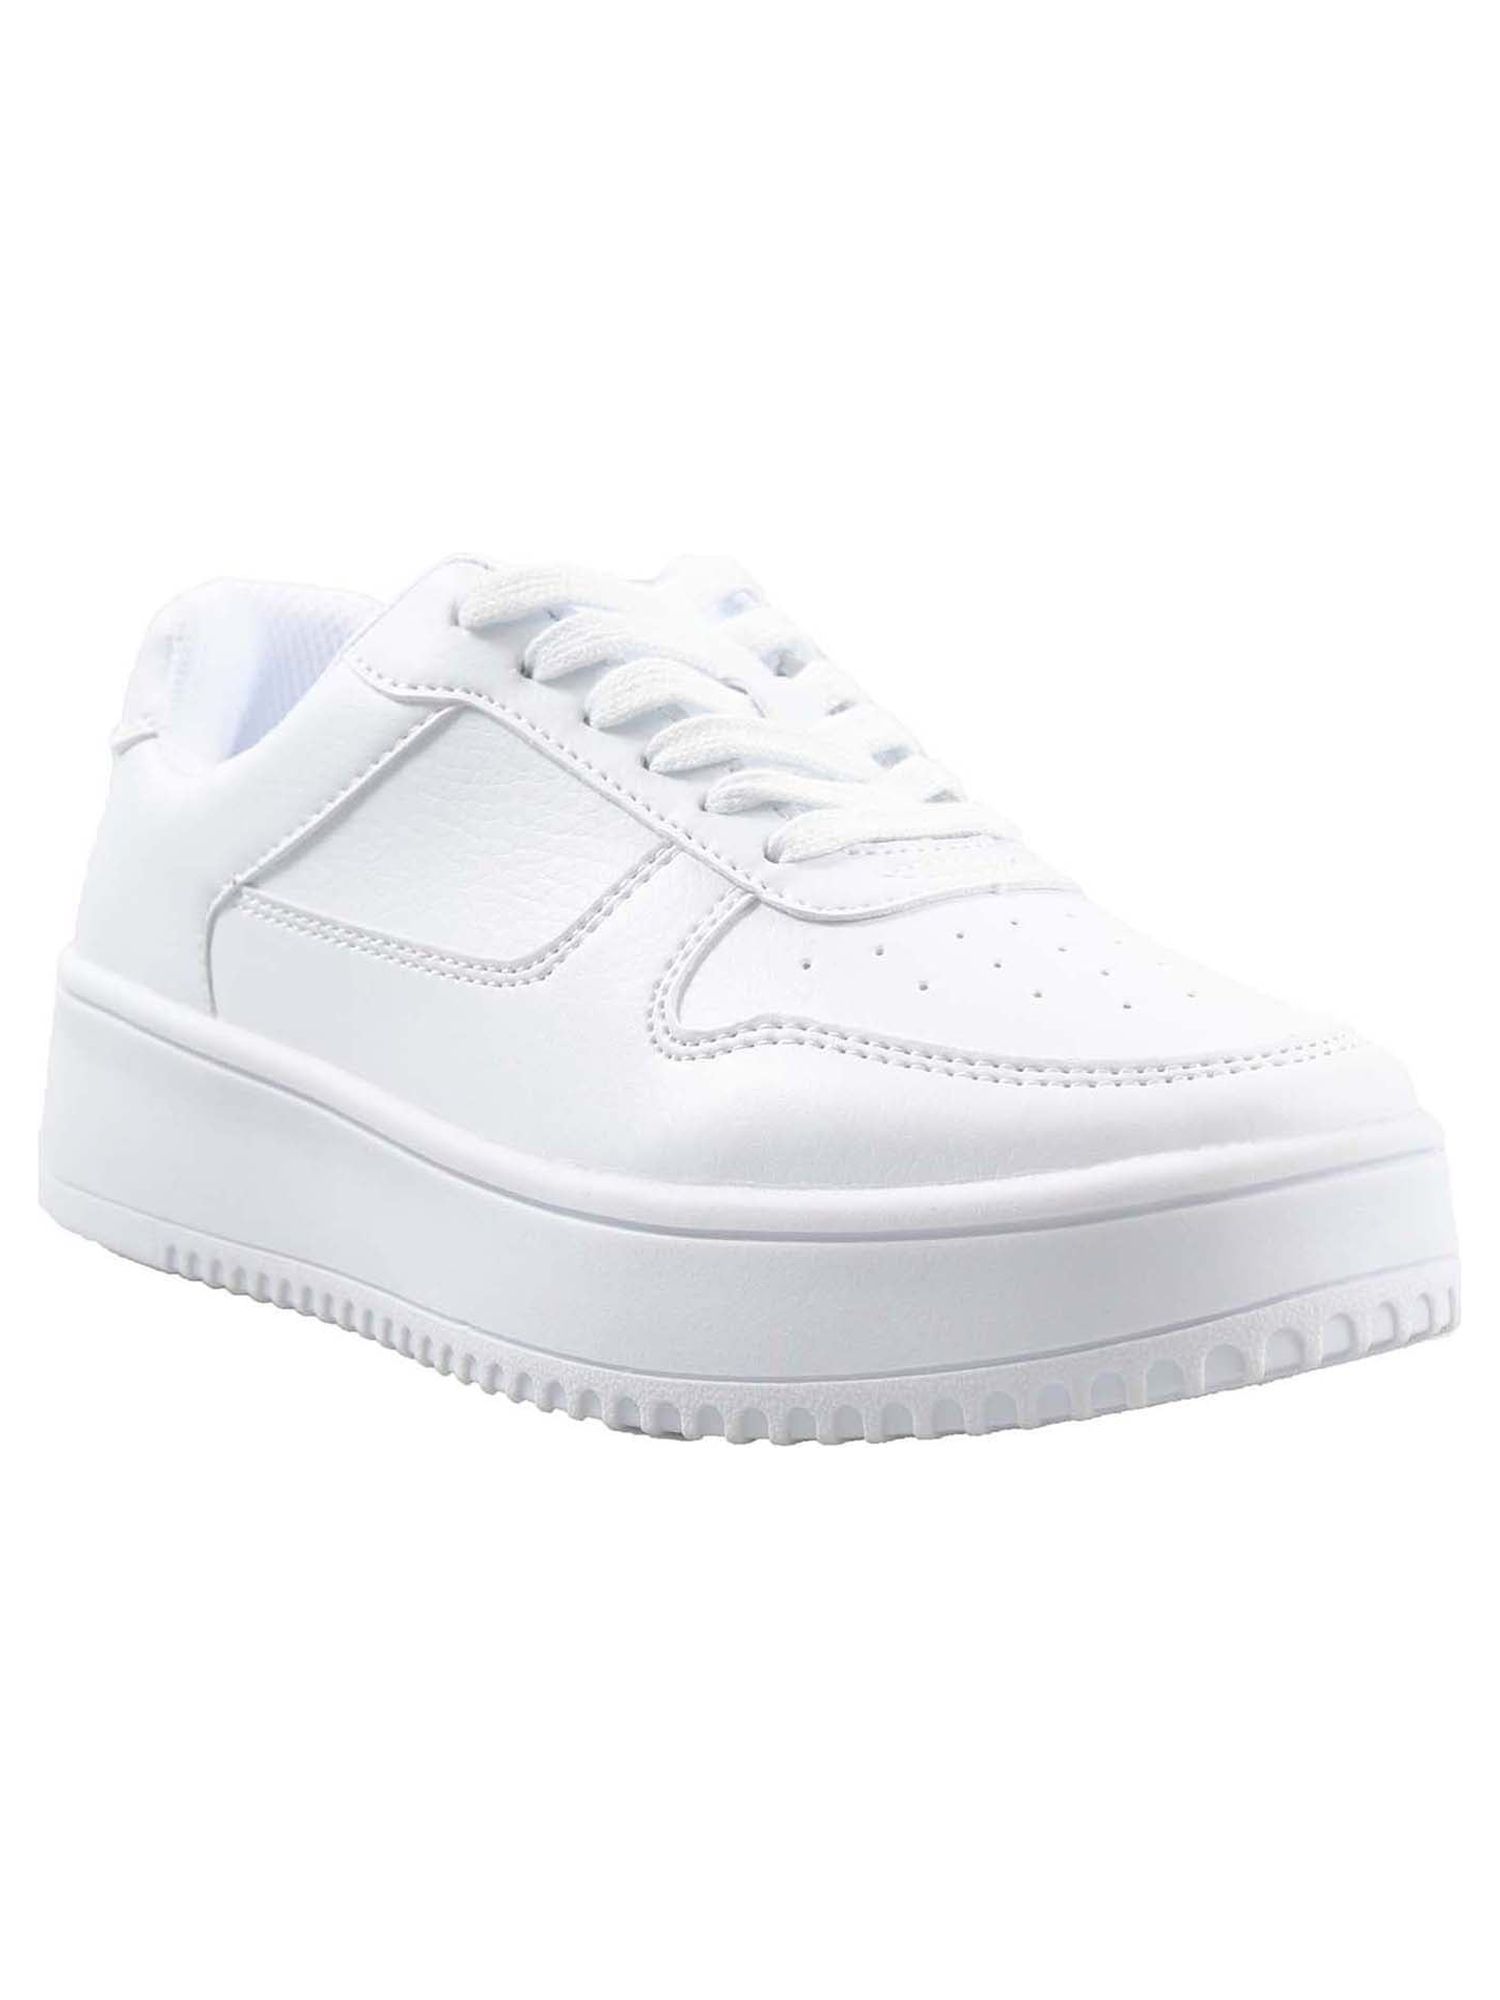 Time and Tru Women's Platform Sneakers (Wide Width Available) - image 1 of 7